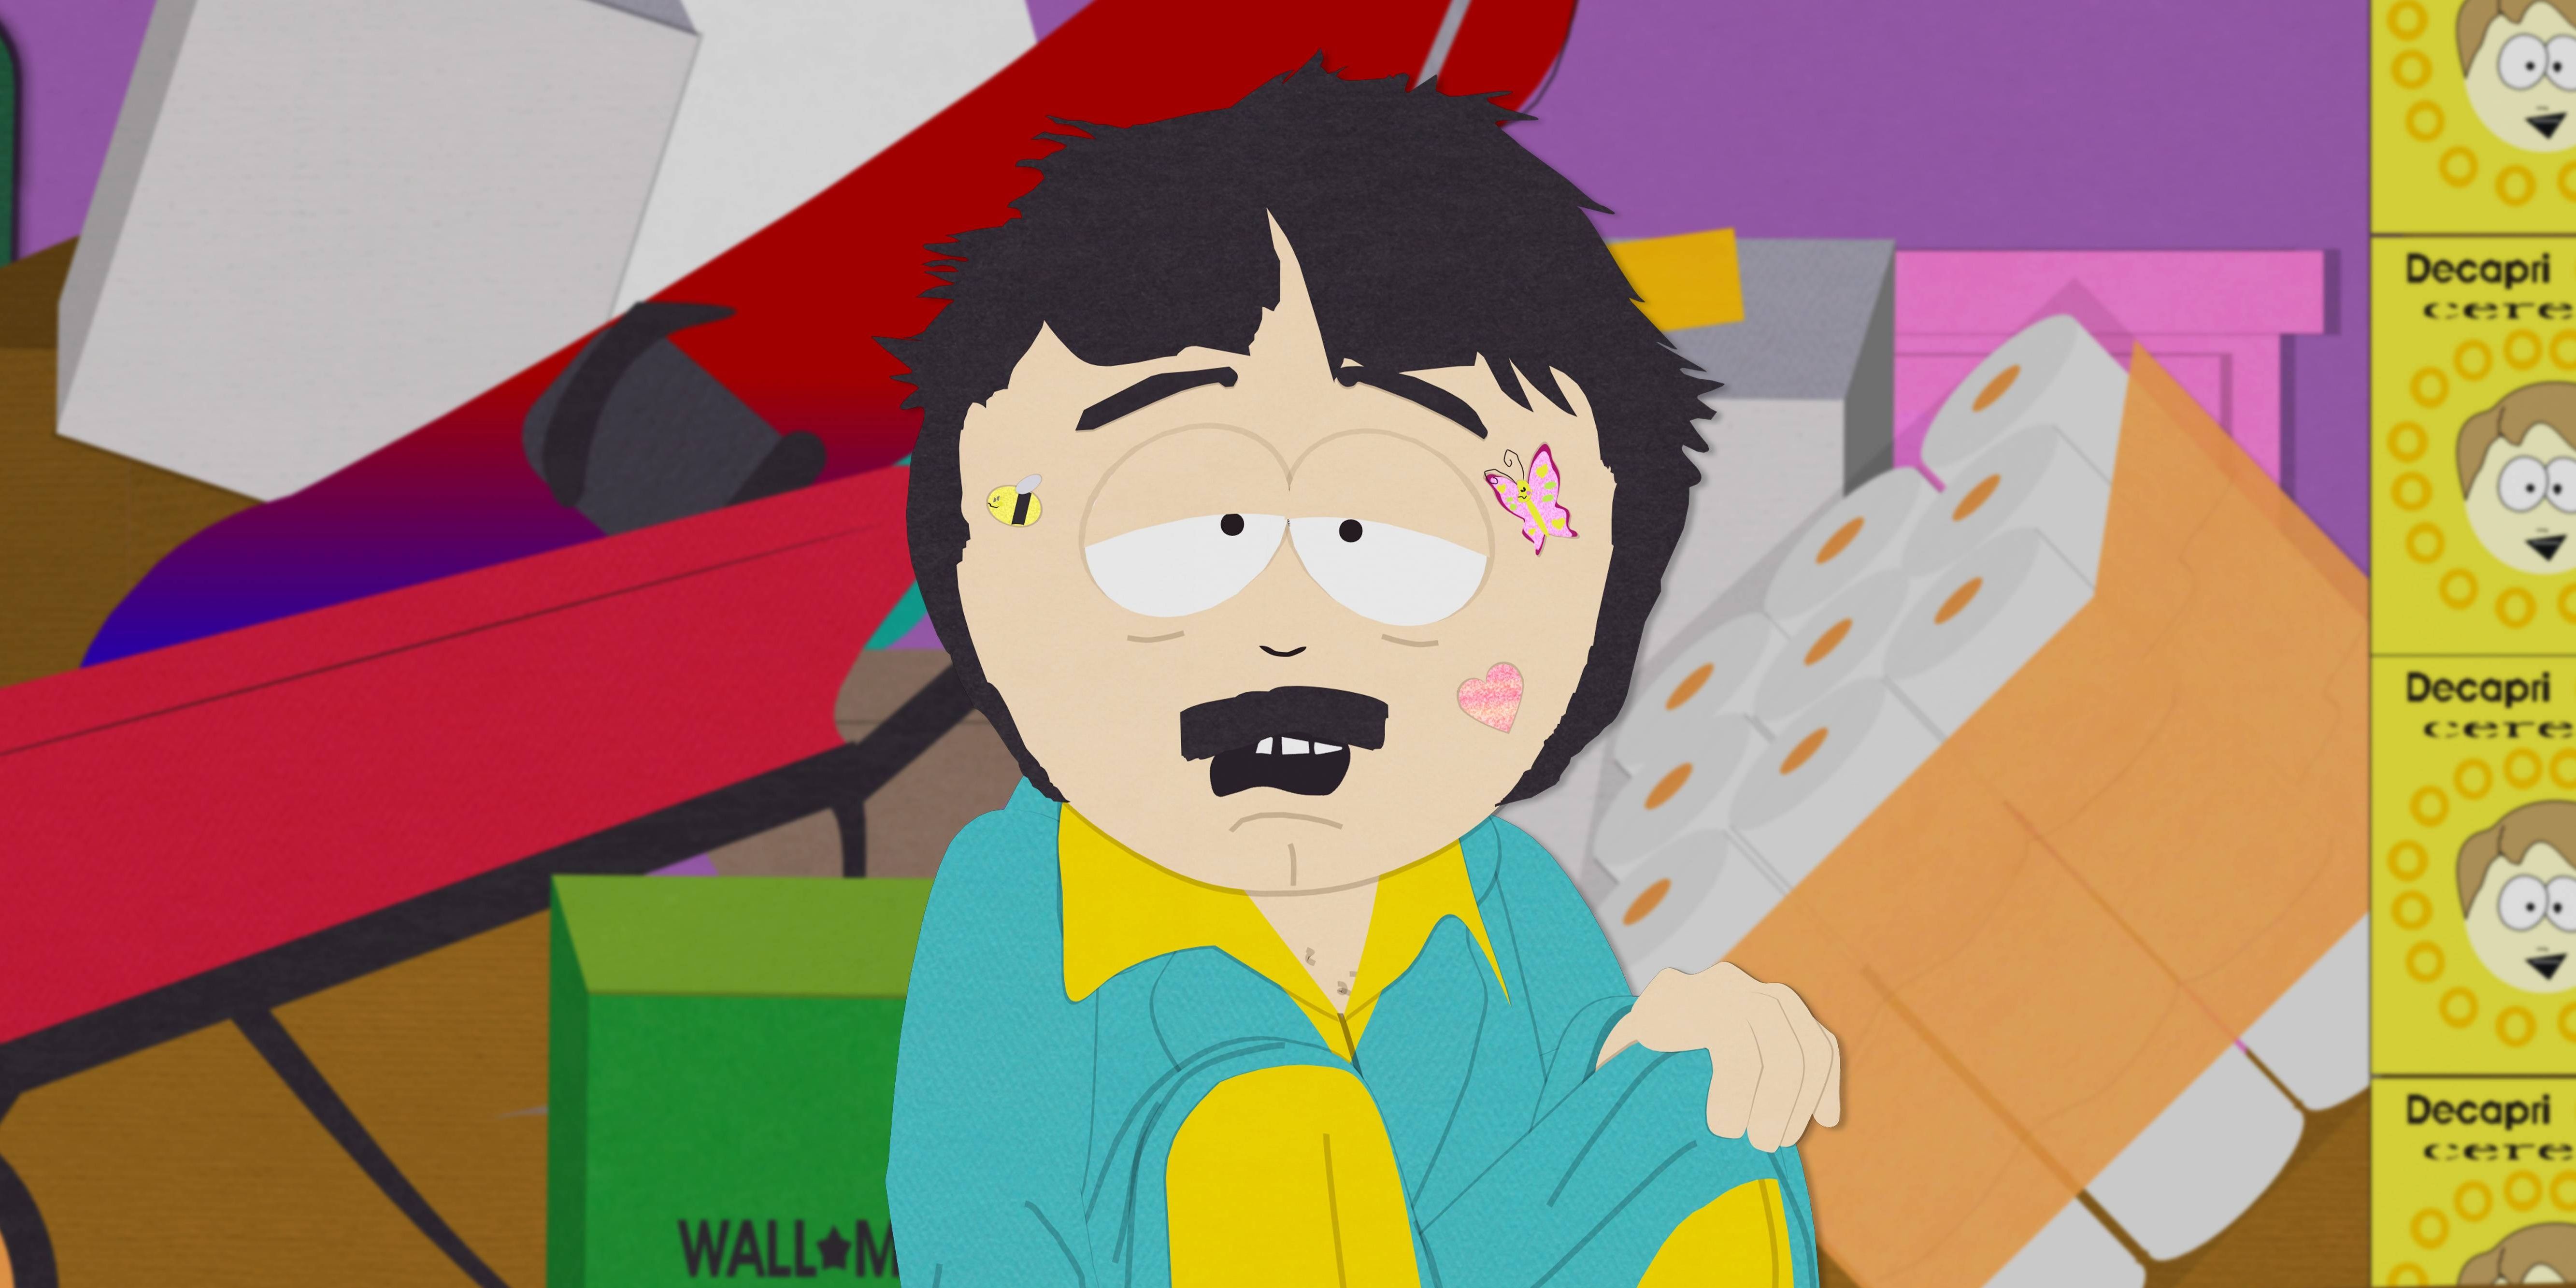 Randy in Something Wall-Mart This Way Comes, a South Park episode